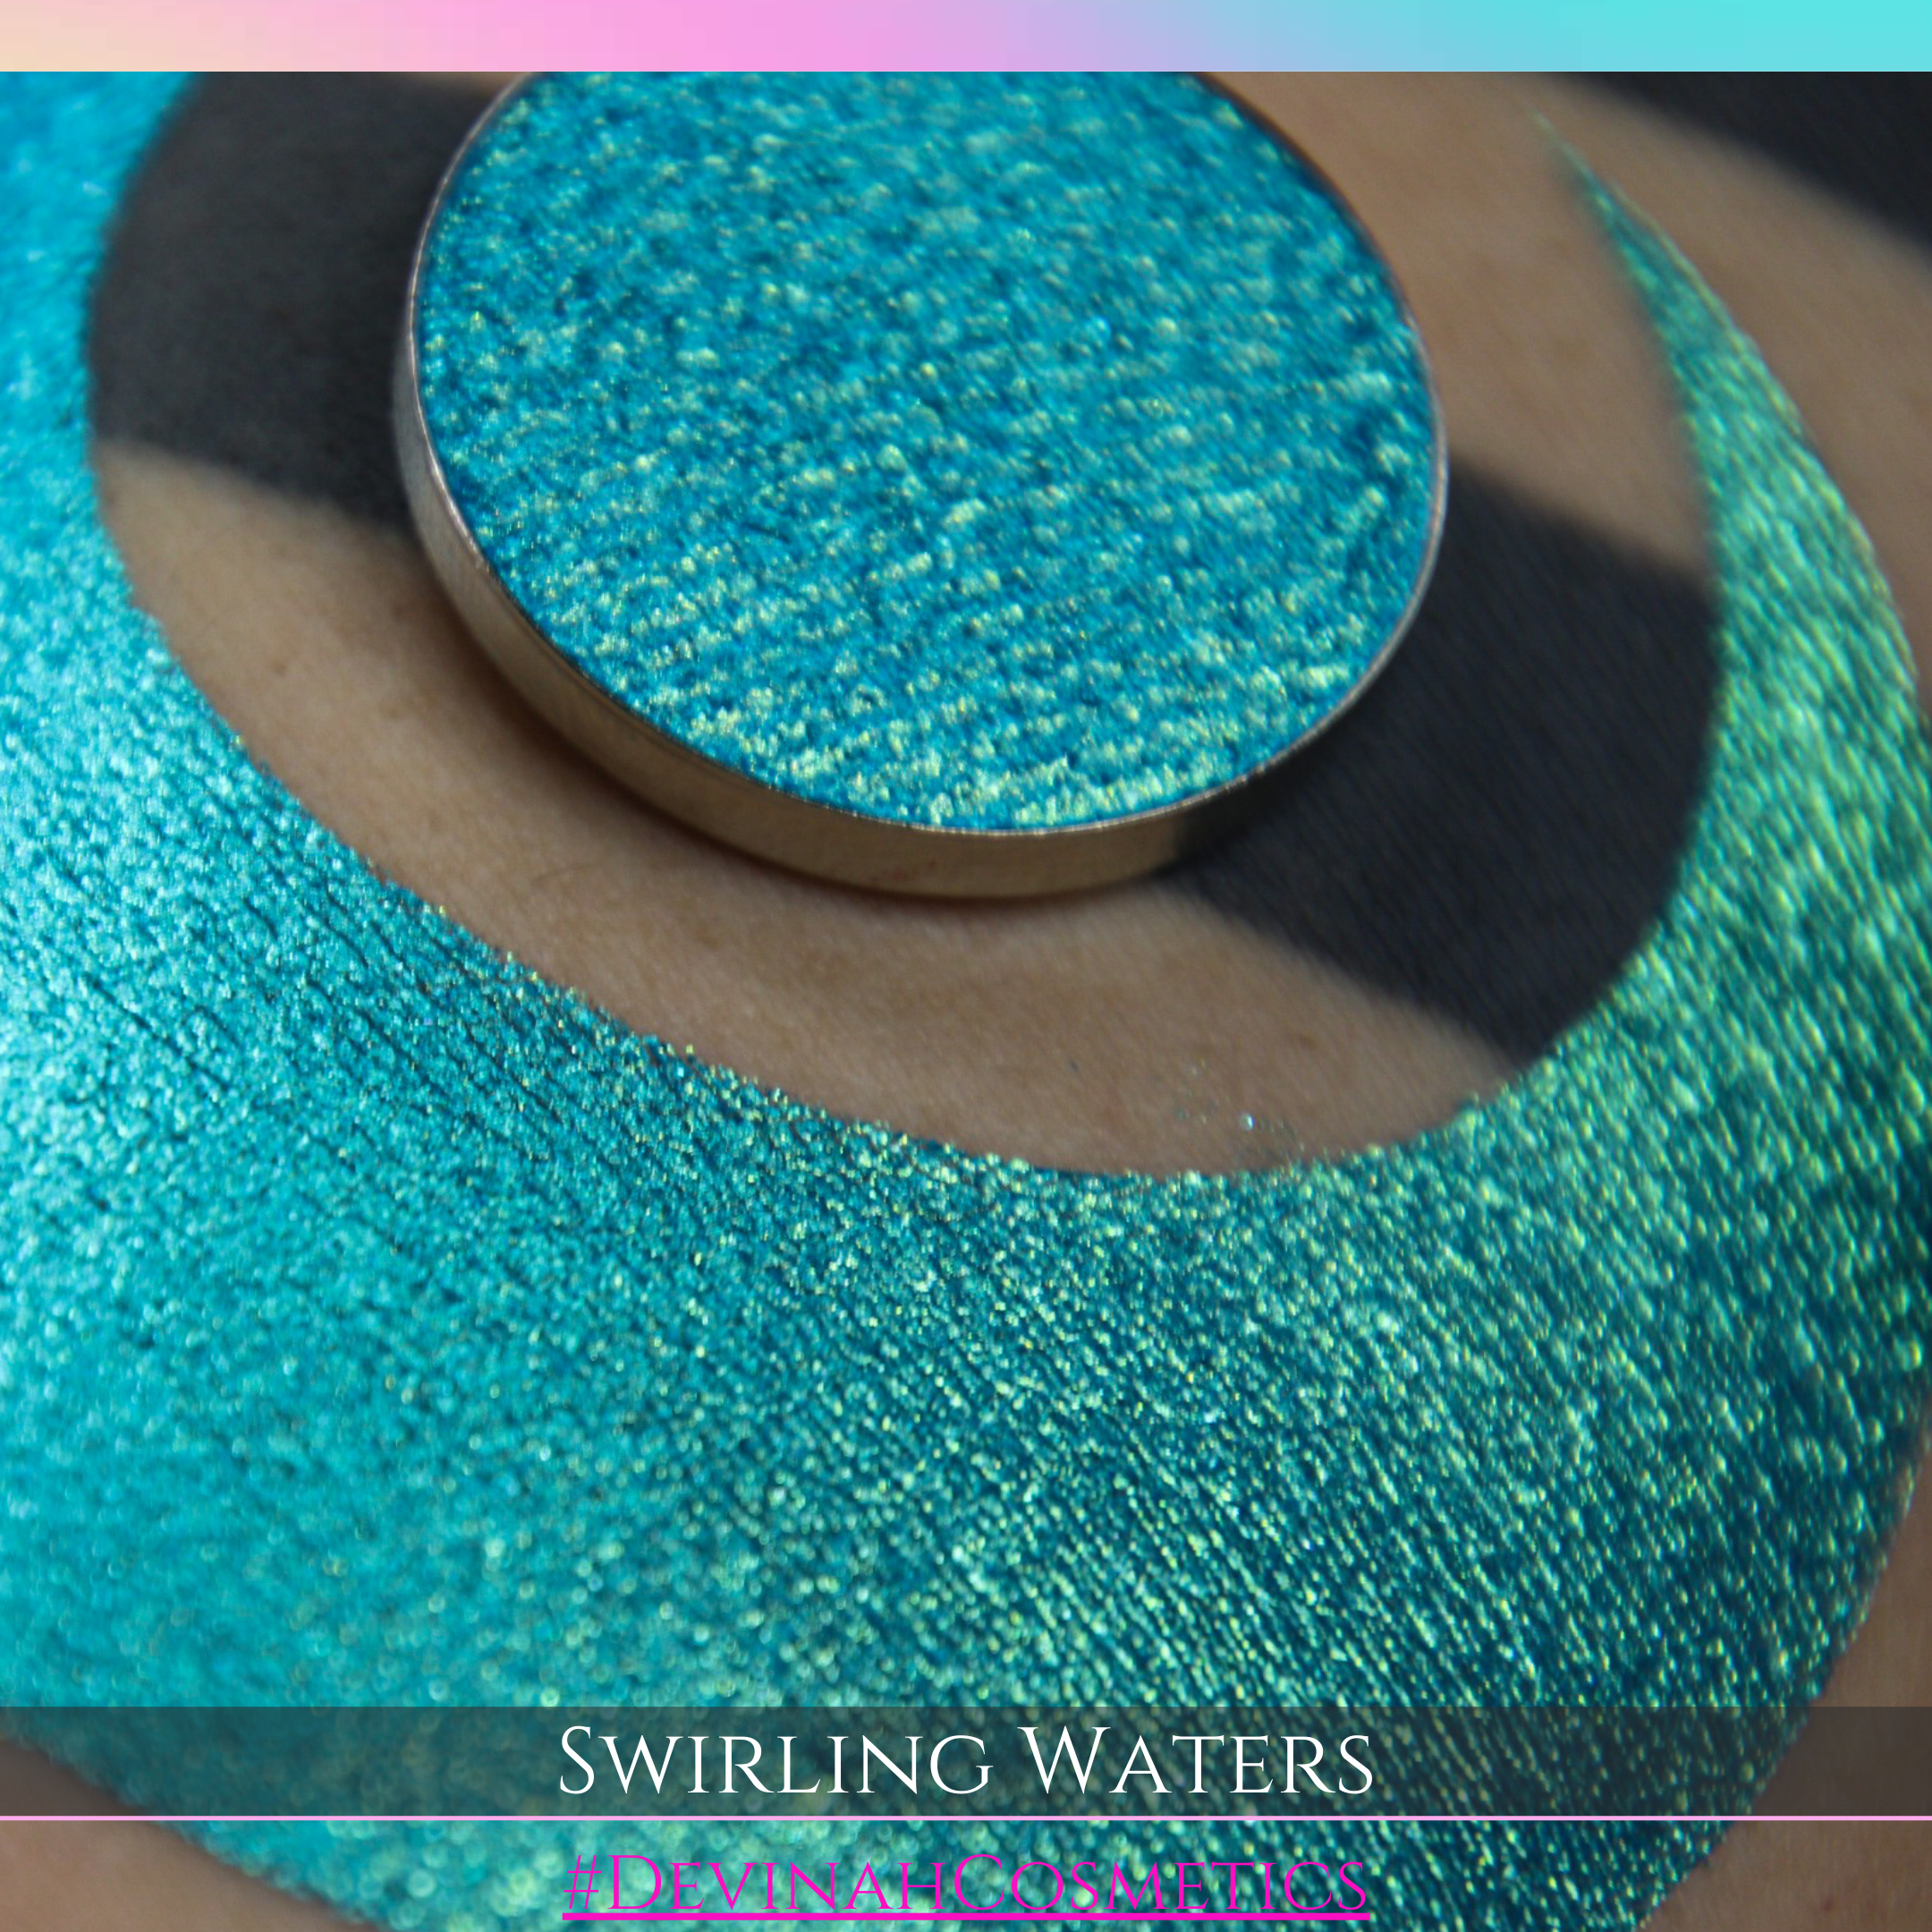 SWIRLING WATERS Pressed Pigment